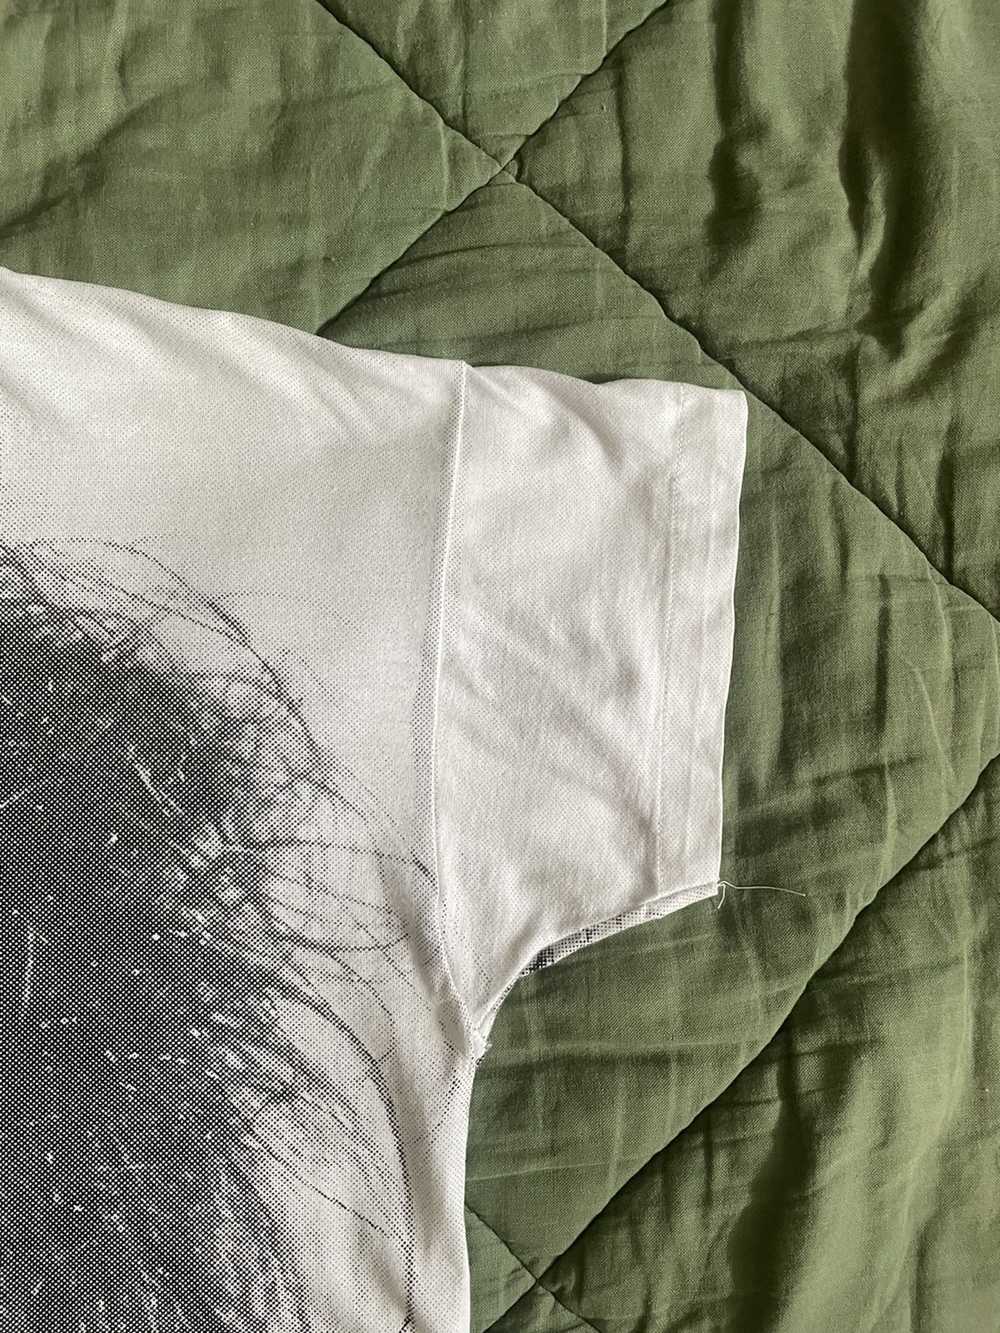 Band Tees × Rare × Vintage Robert Smith the cure … - image 7